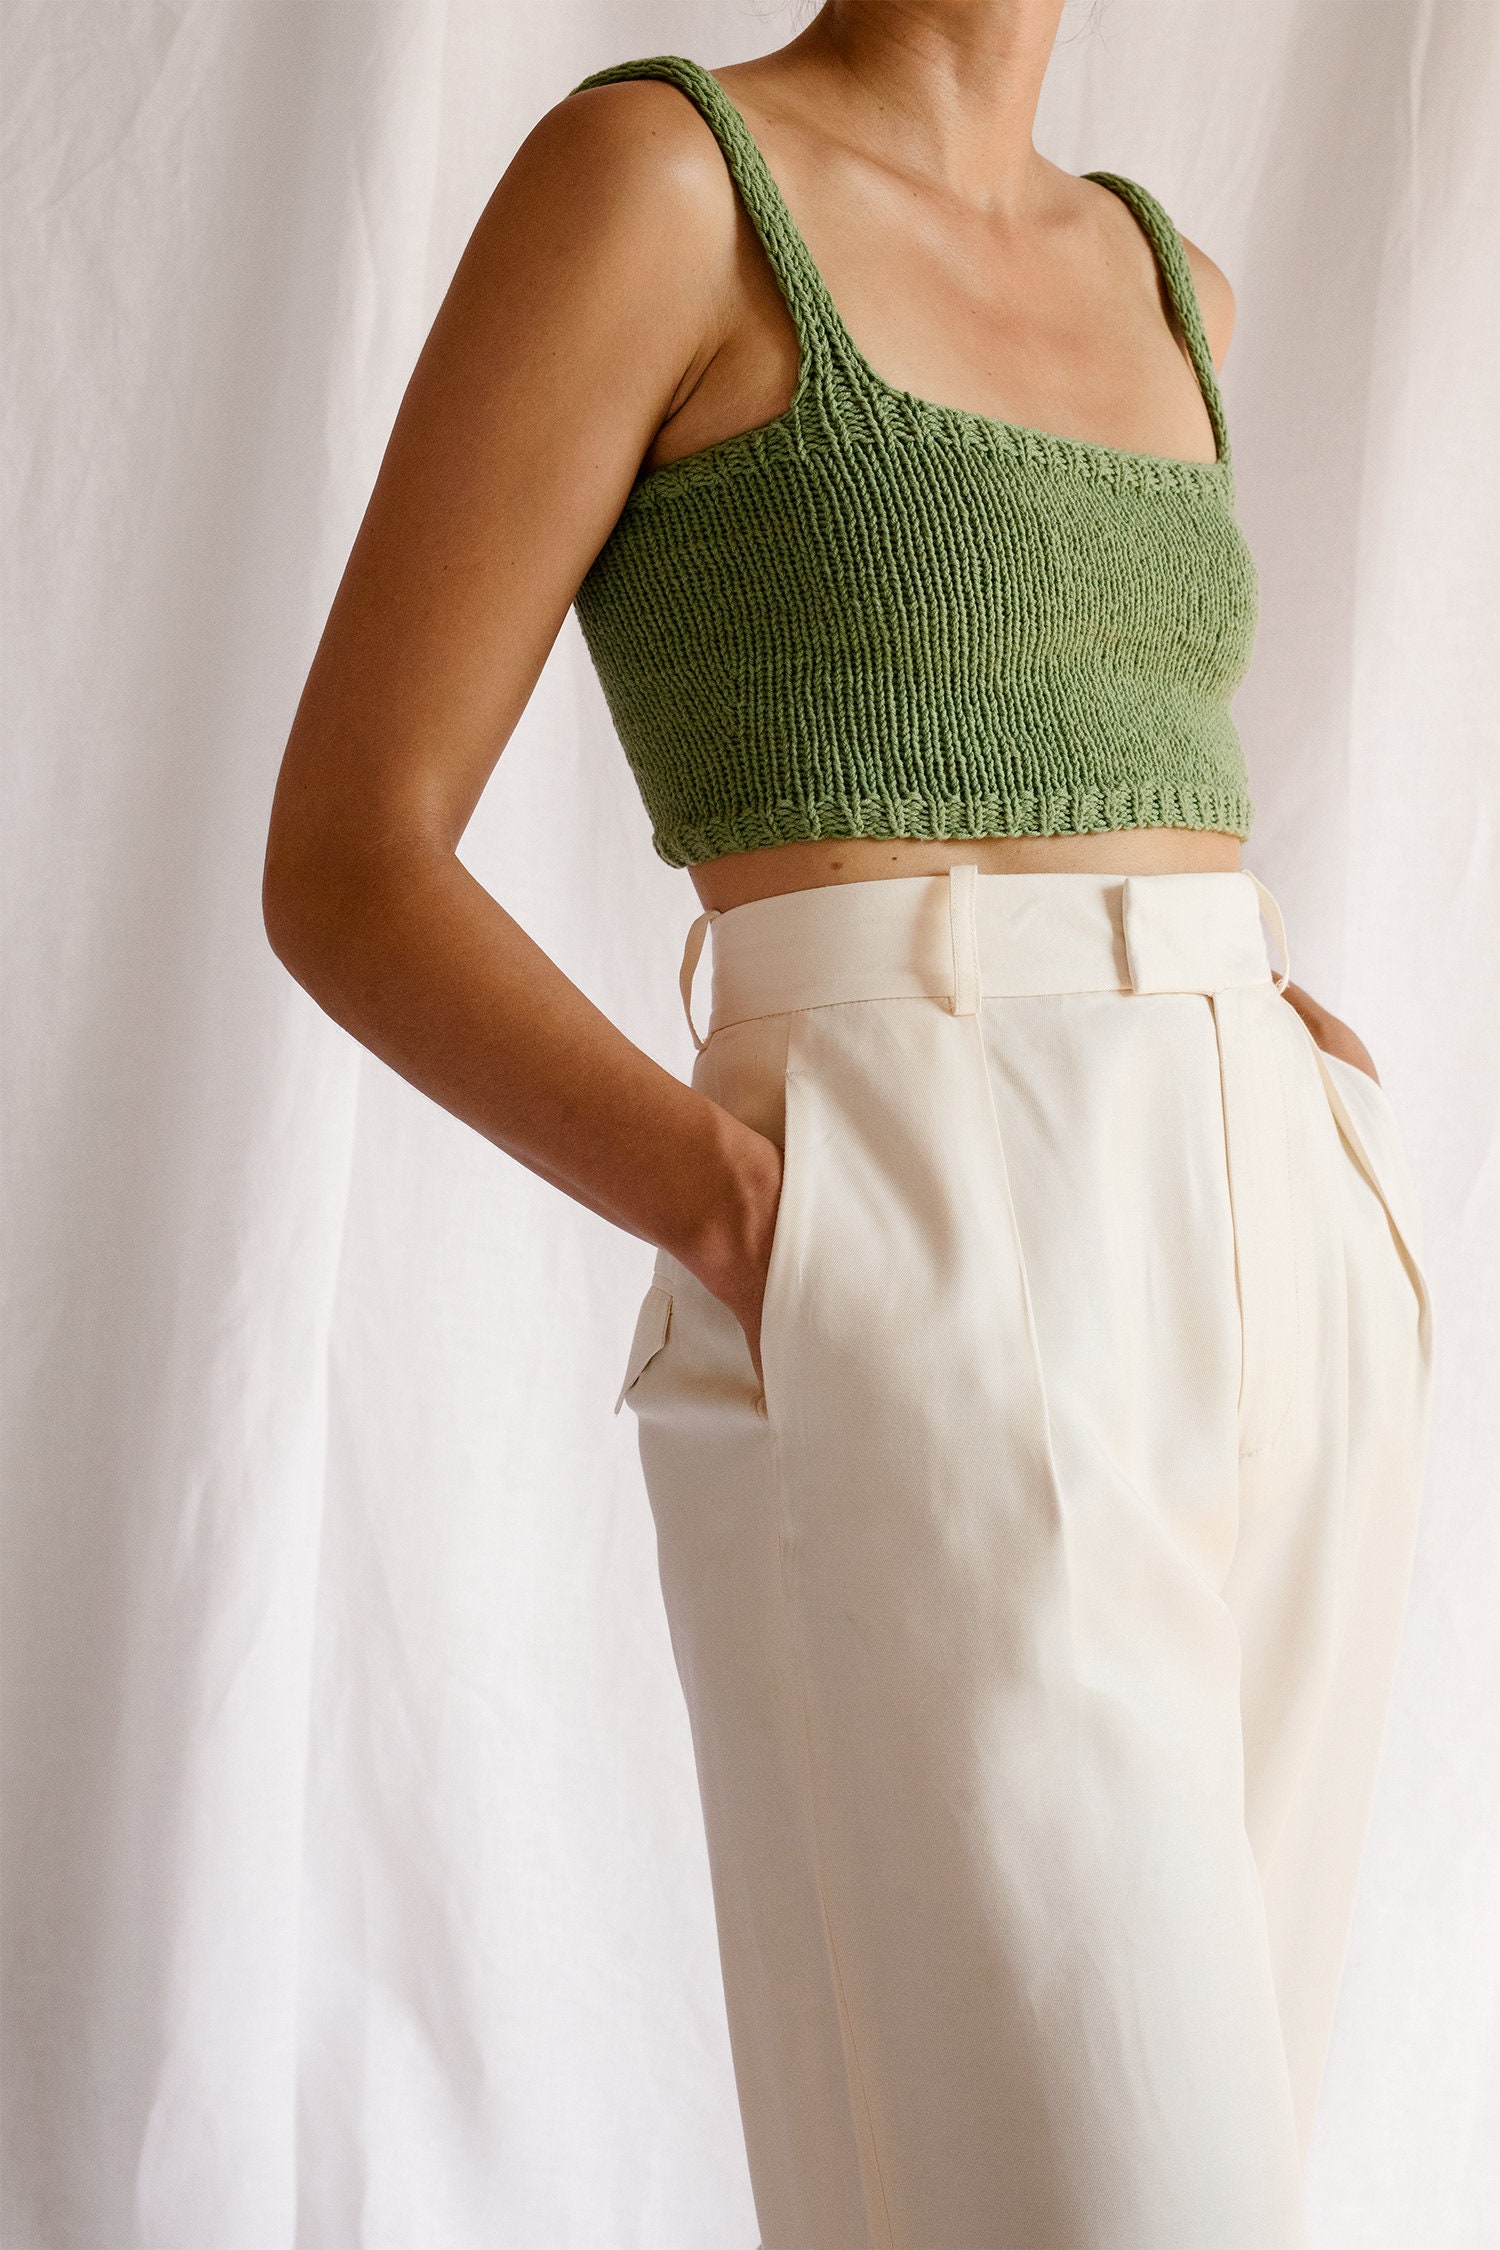 Square Neck Crop Top, Minimal Knit Top, Cropped Yoga Top, Hand Knit, Square  Neckline,sports Knit Bra, Fitted Cotton Bralette in Terra Cotta -   Ireland